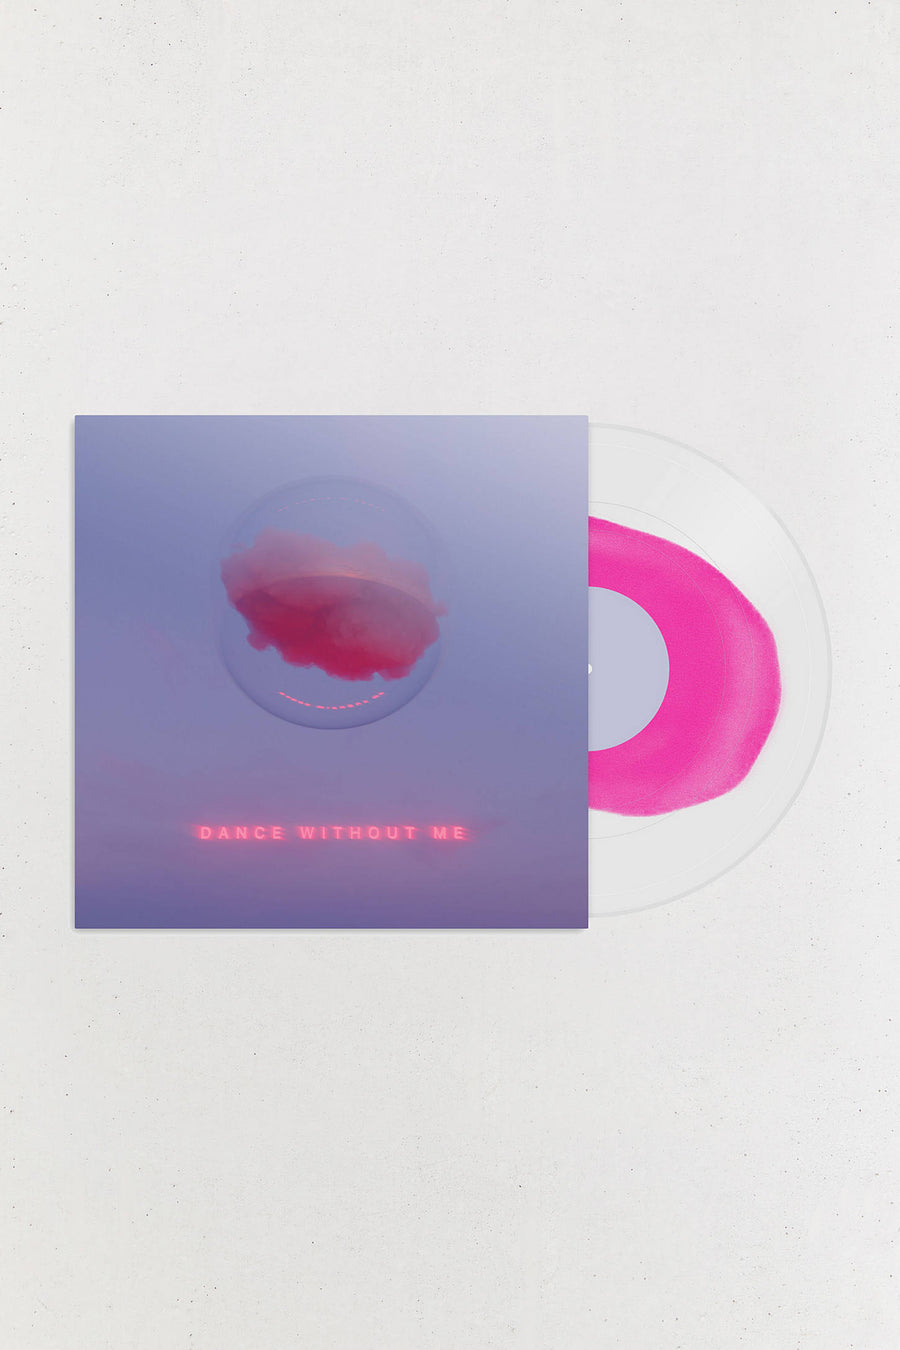 DRAMA - Dance Without Me Limited Edition Exclusive Pink Vinyl Limited #1000